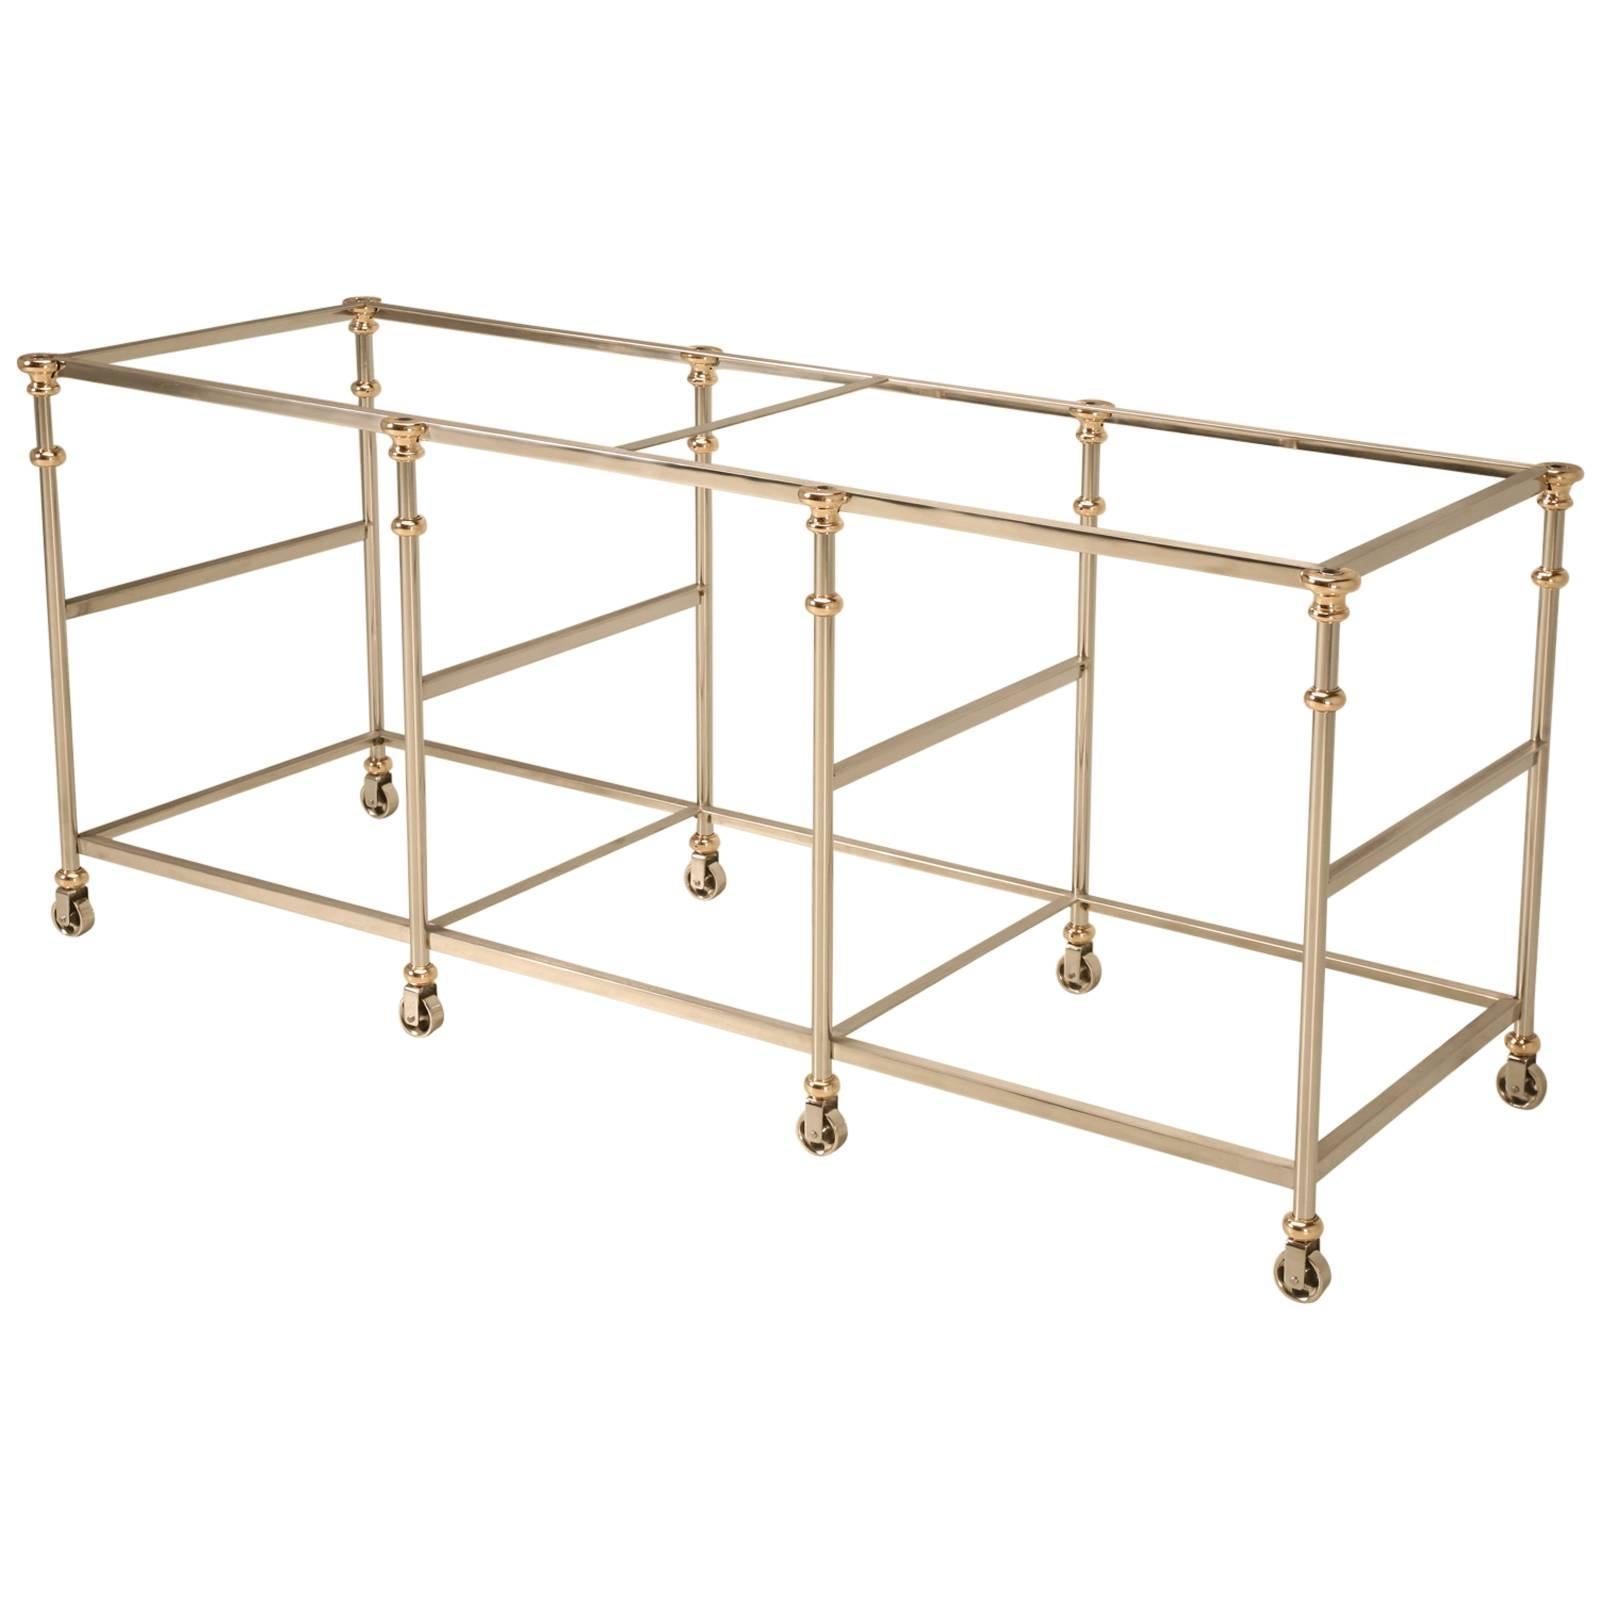 French Inspired Kitchen Island Frame, Stainless and Brass Available in Any Size